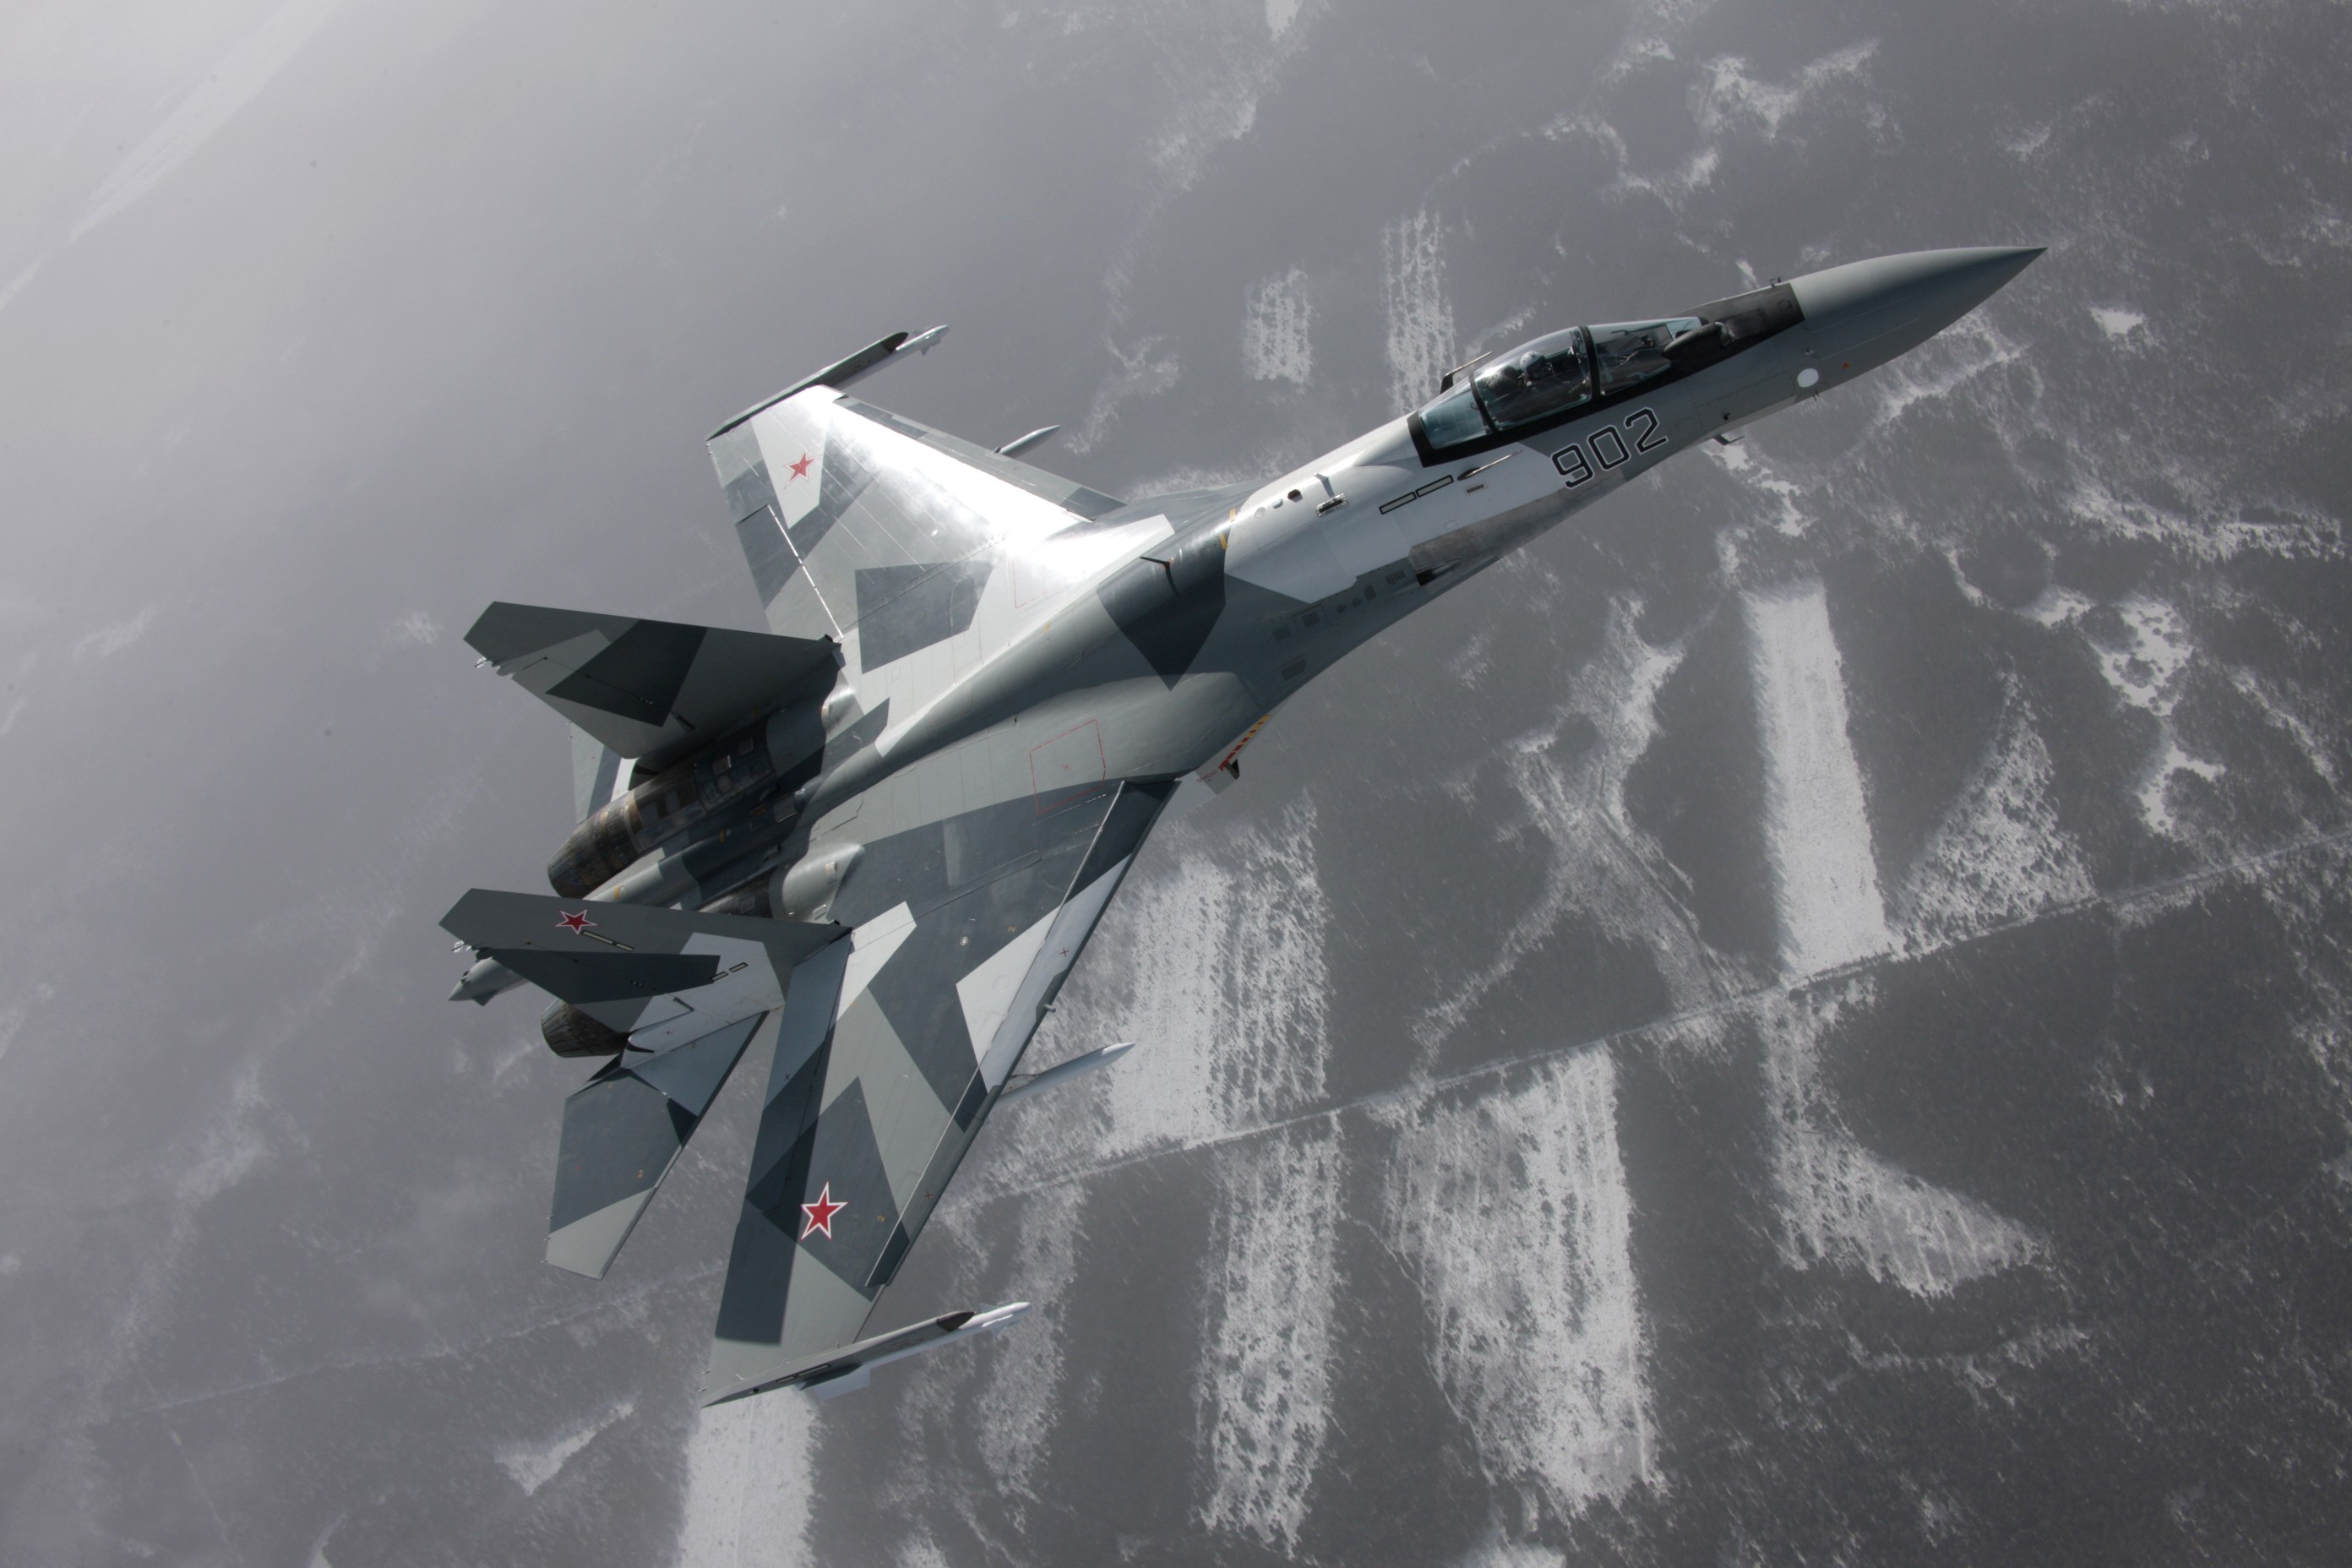 Airplane Russia Jet Fighter Su 27 Military Aircraft Aircraft Vehicle Military 2784x1856